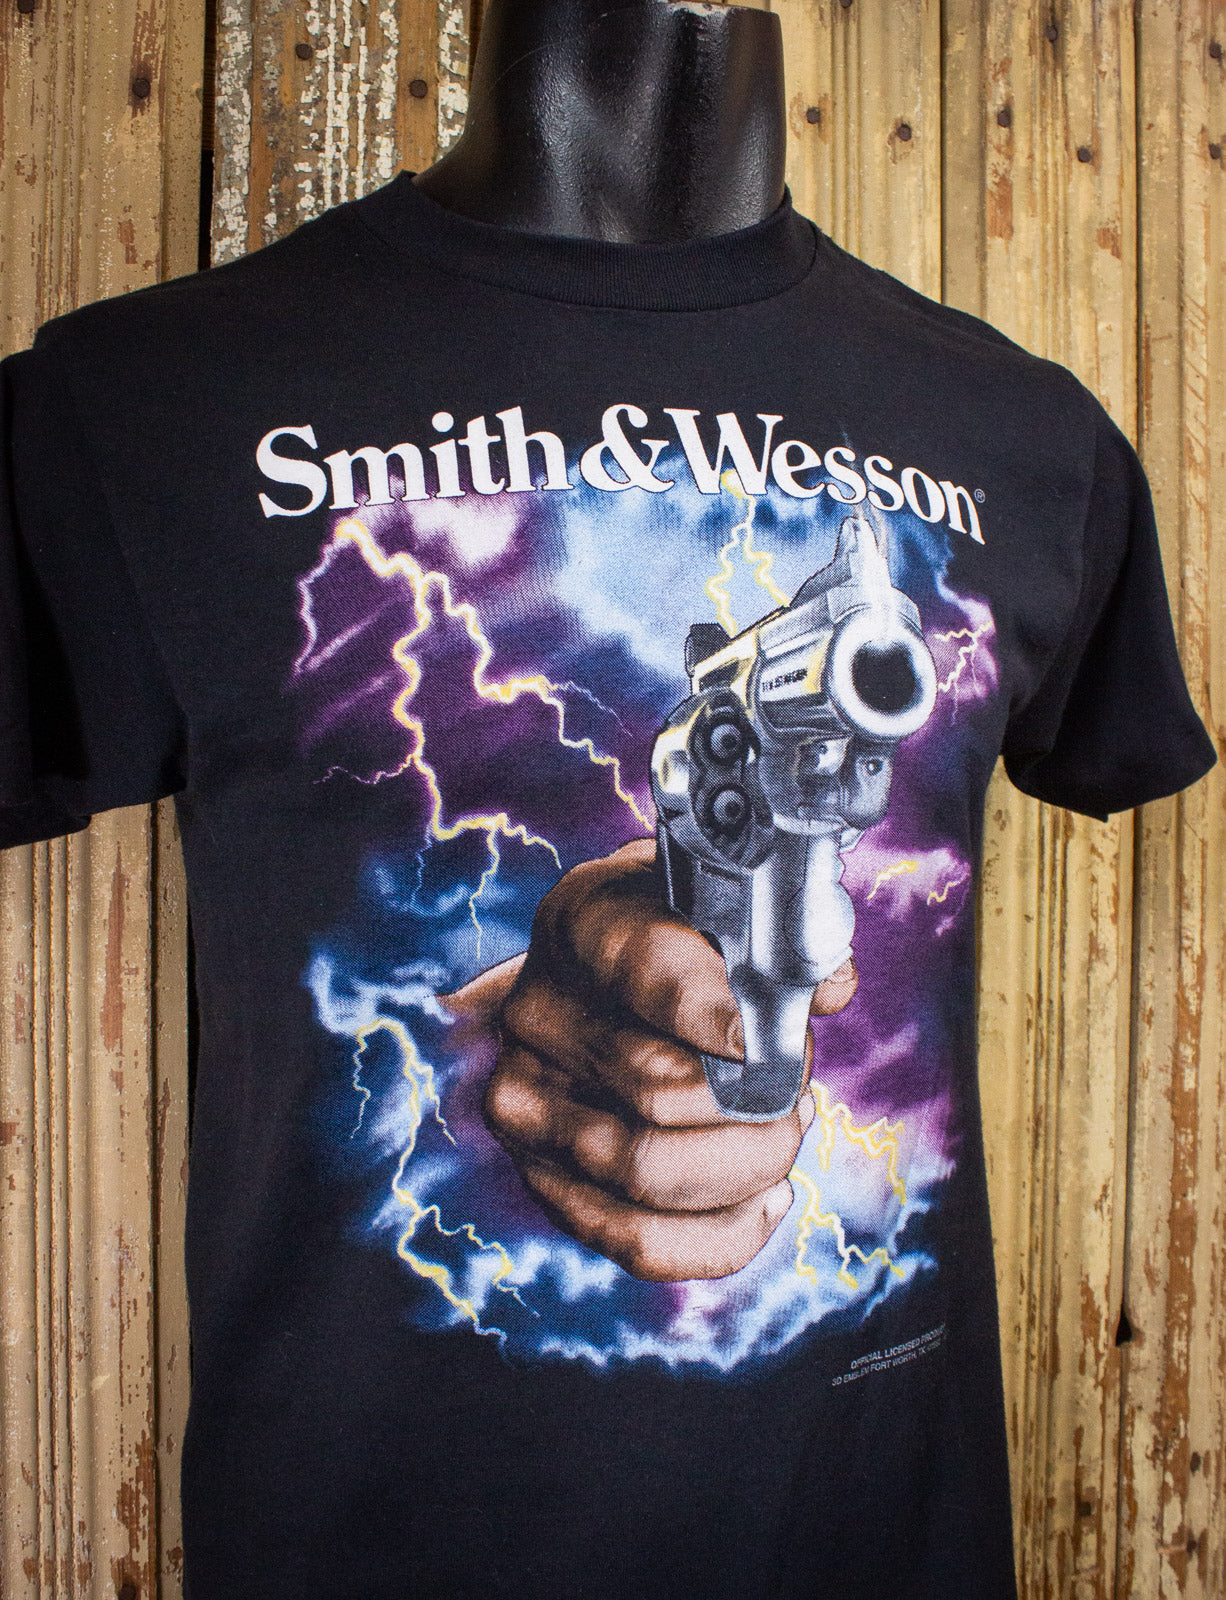 Vintage Smith & Wesson Lightning Graphic T Shirt 90s Black SmallVintage Smith & Wesson Lightning Graphic T Shirt 90s Black Small